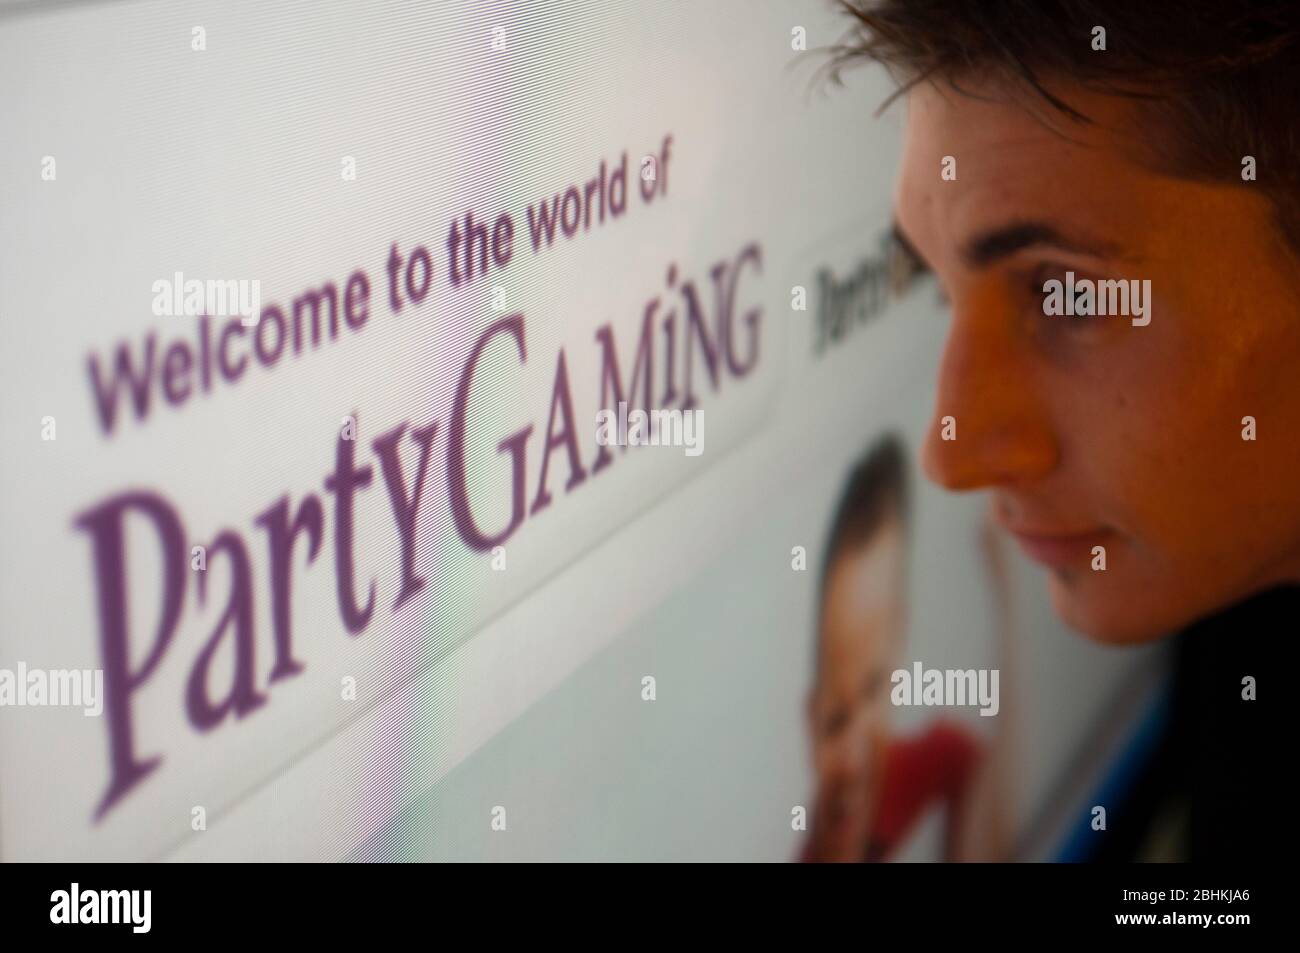 Illustrative image of the PartyGaming website. Stock Photo